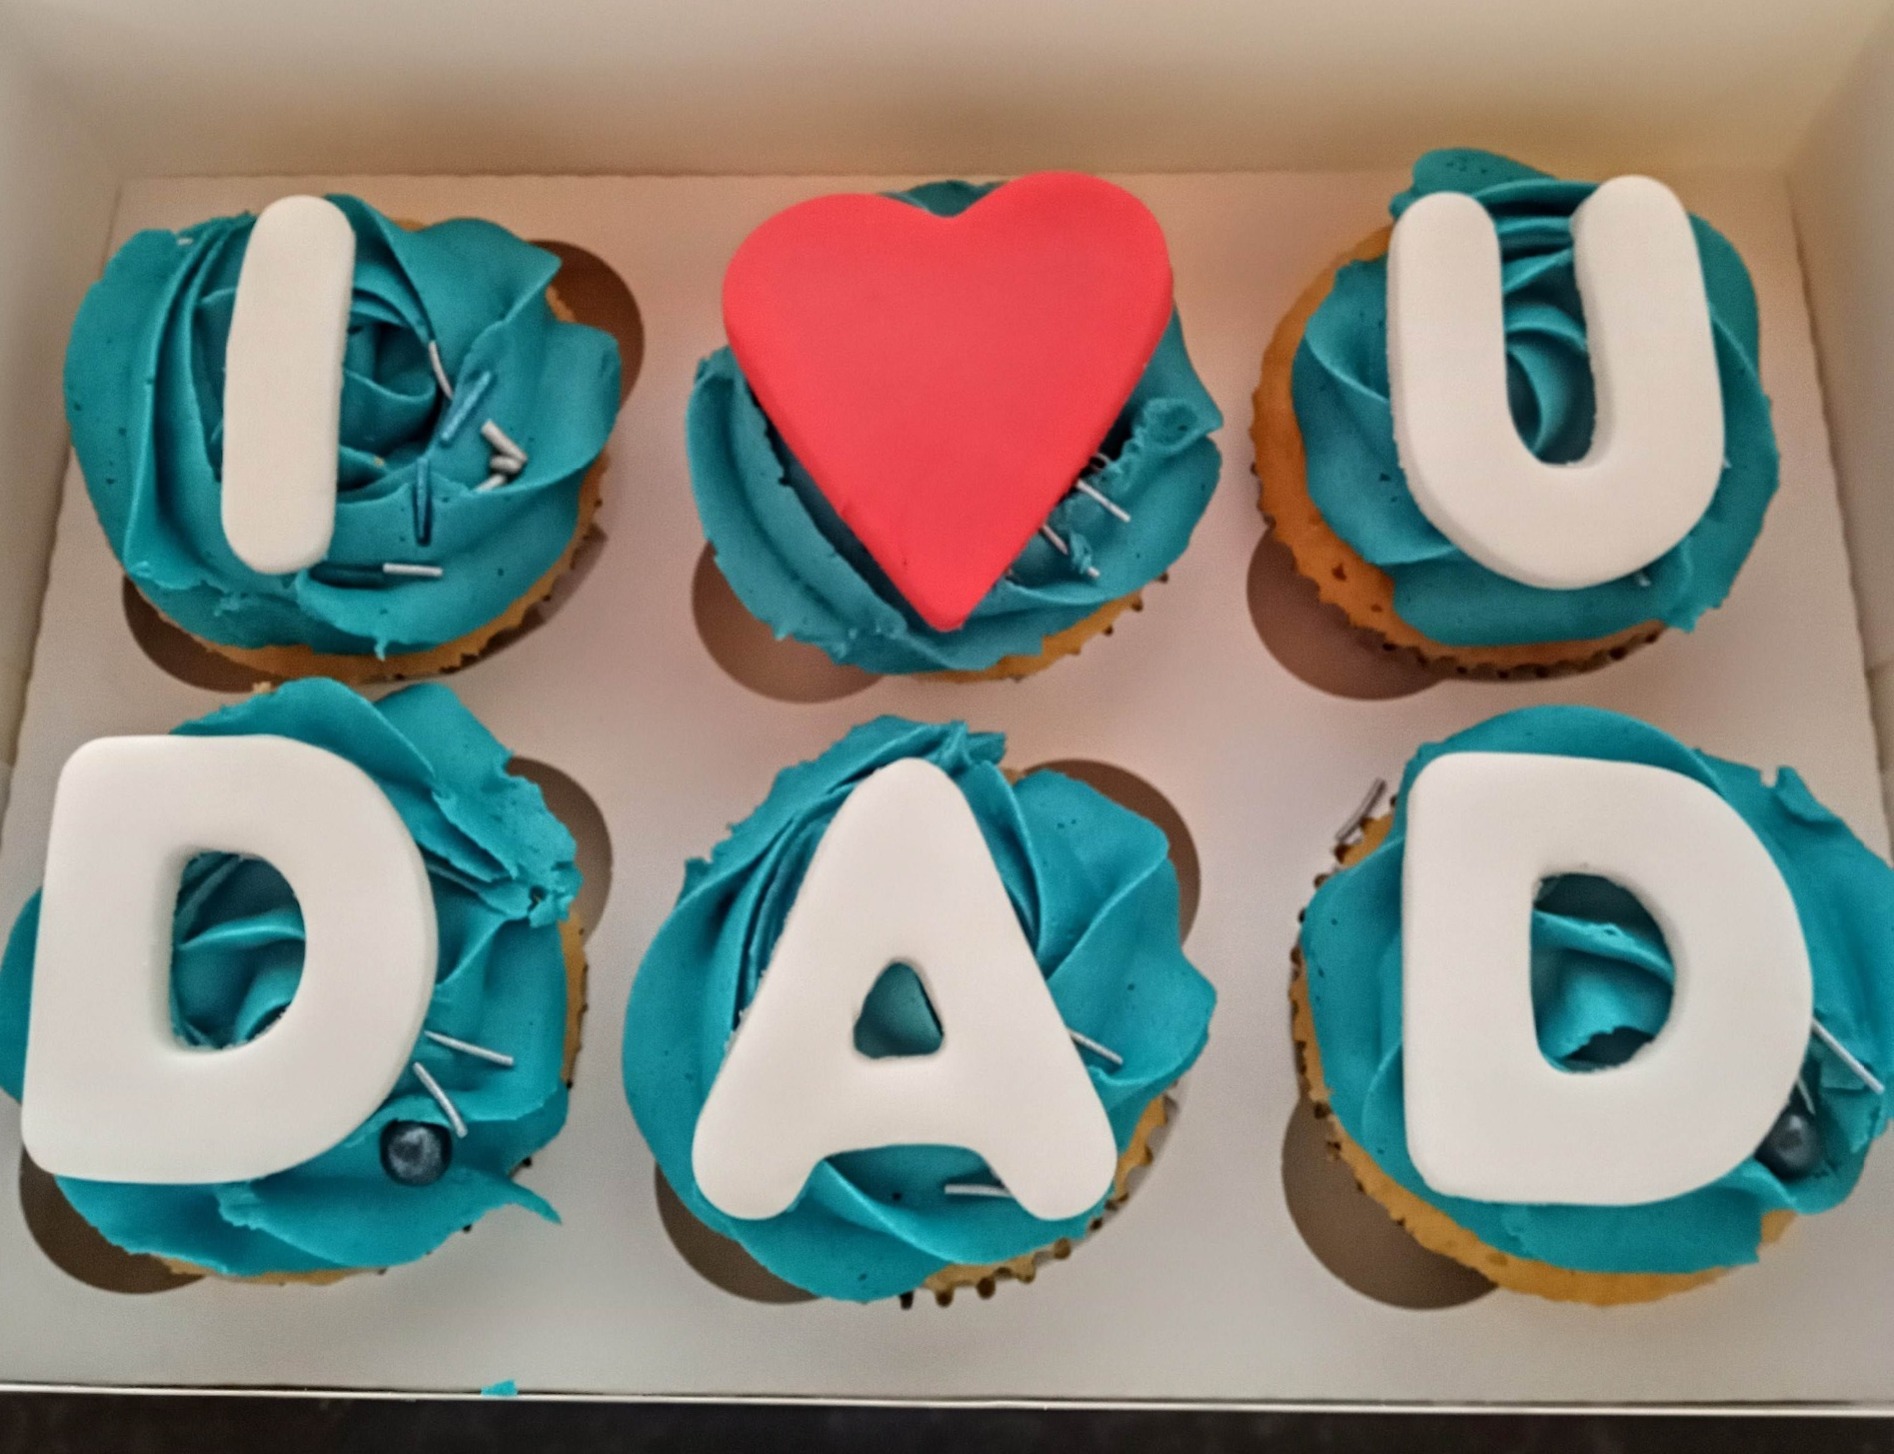 "I love you dad" cupcakes